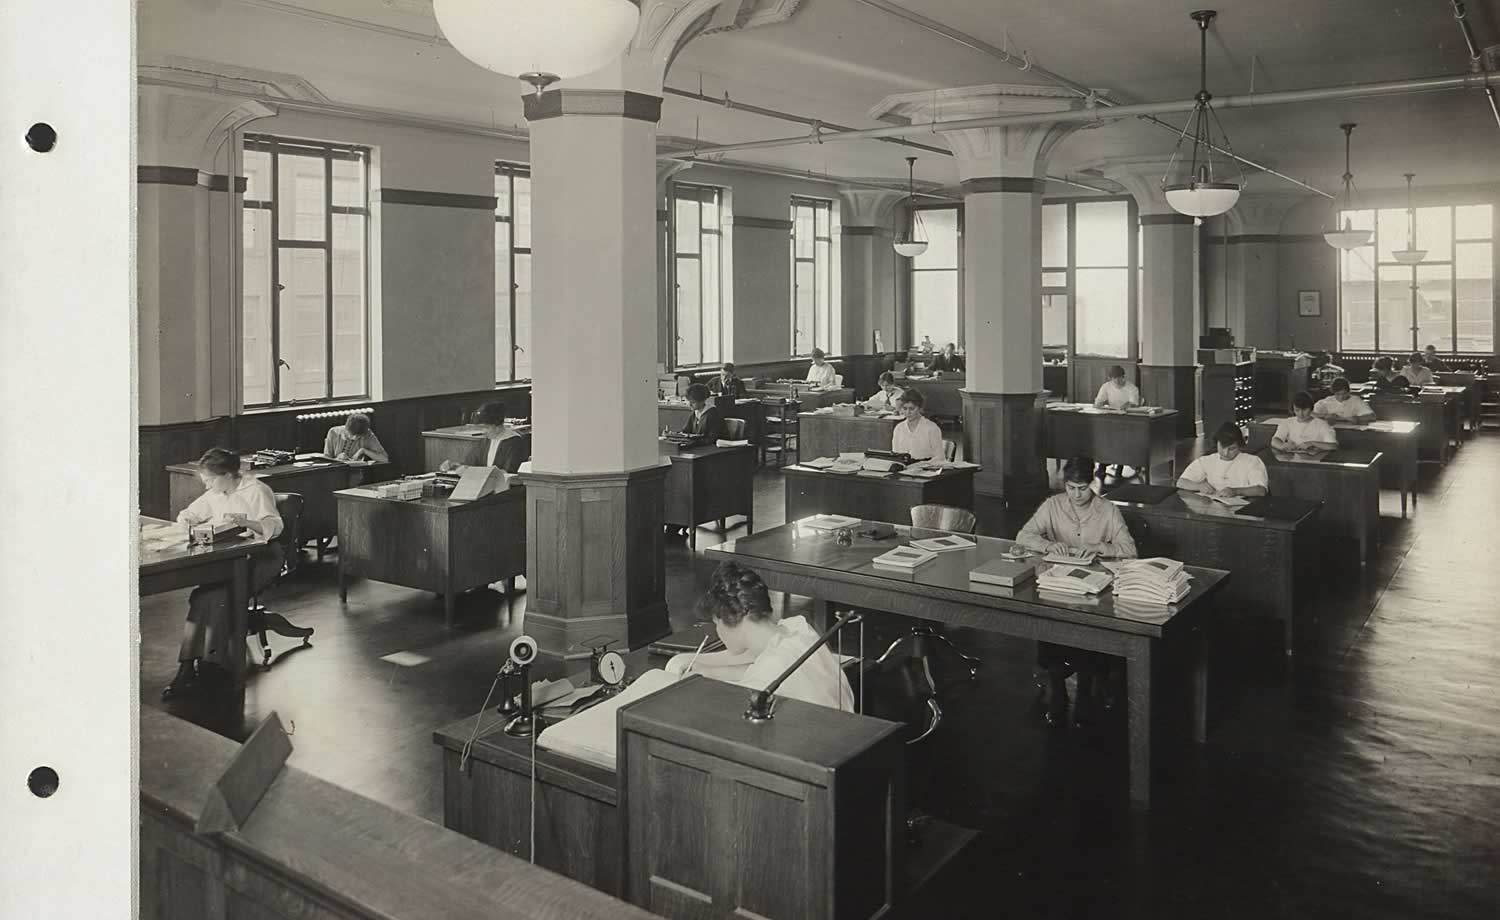 Black and white image. Rows of desks across the photograph, approximately 16 desks total. In the back corner an enclosed office is visible. Mostly women working at the desks. Large pillars in the center of the room, and large windows on the left hand side.